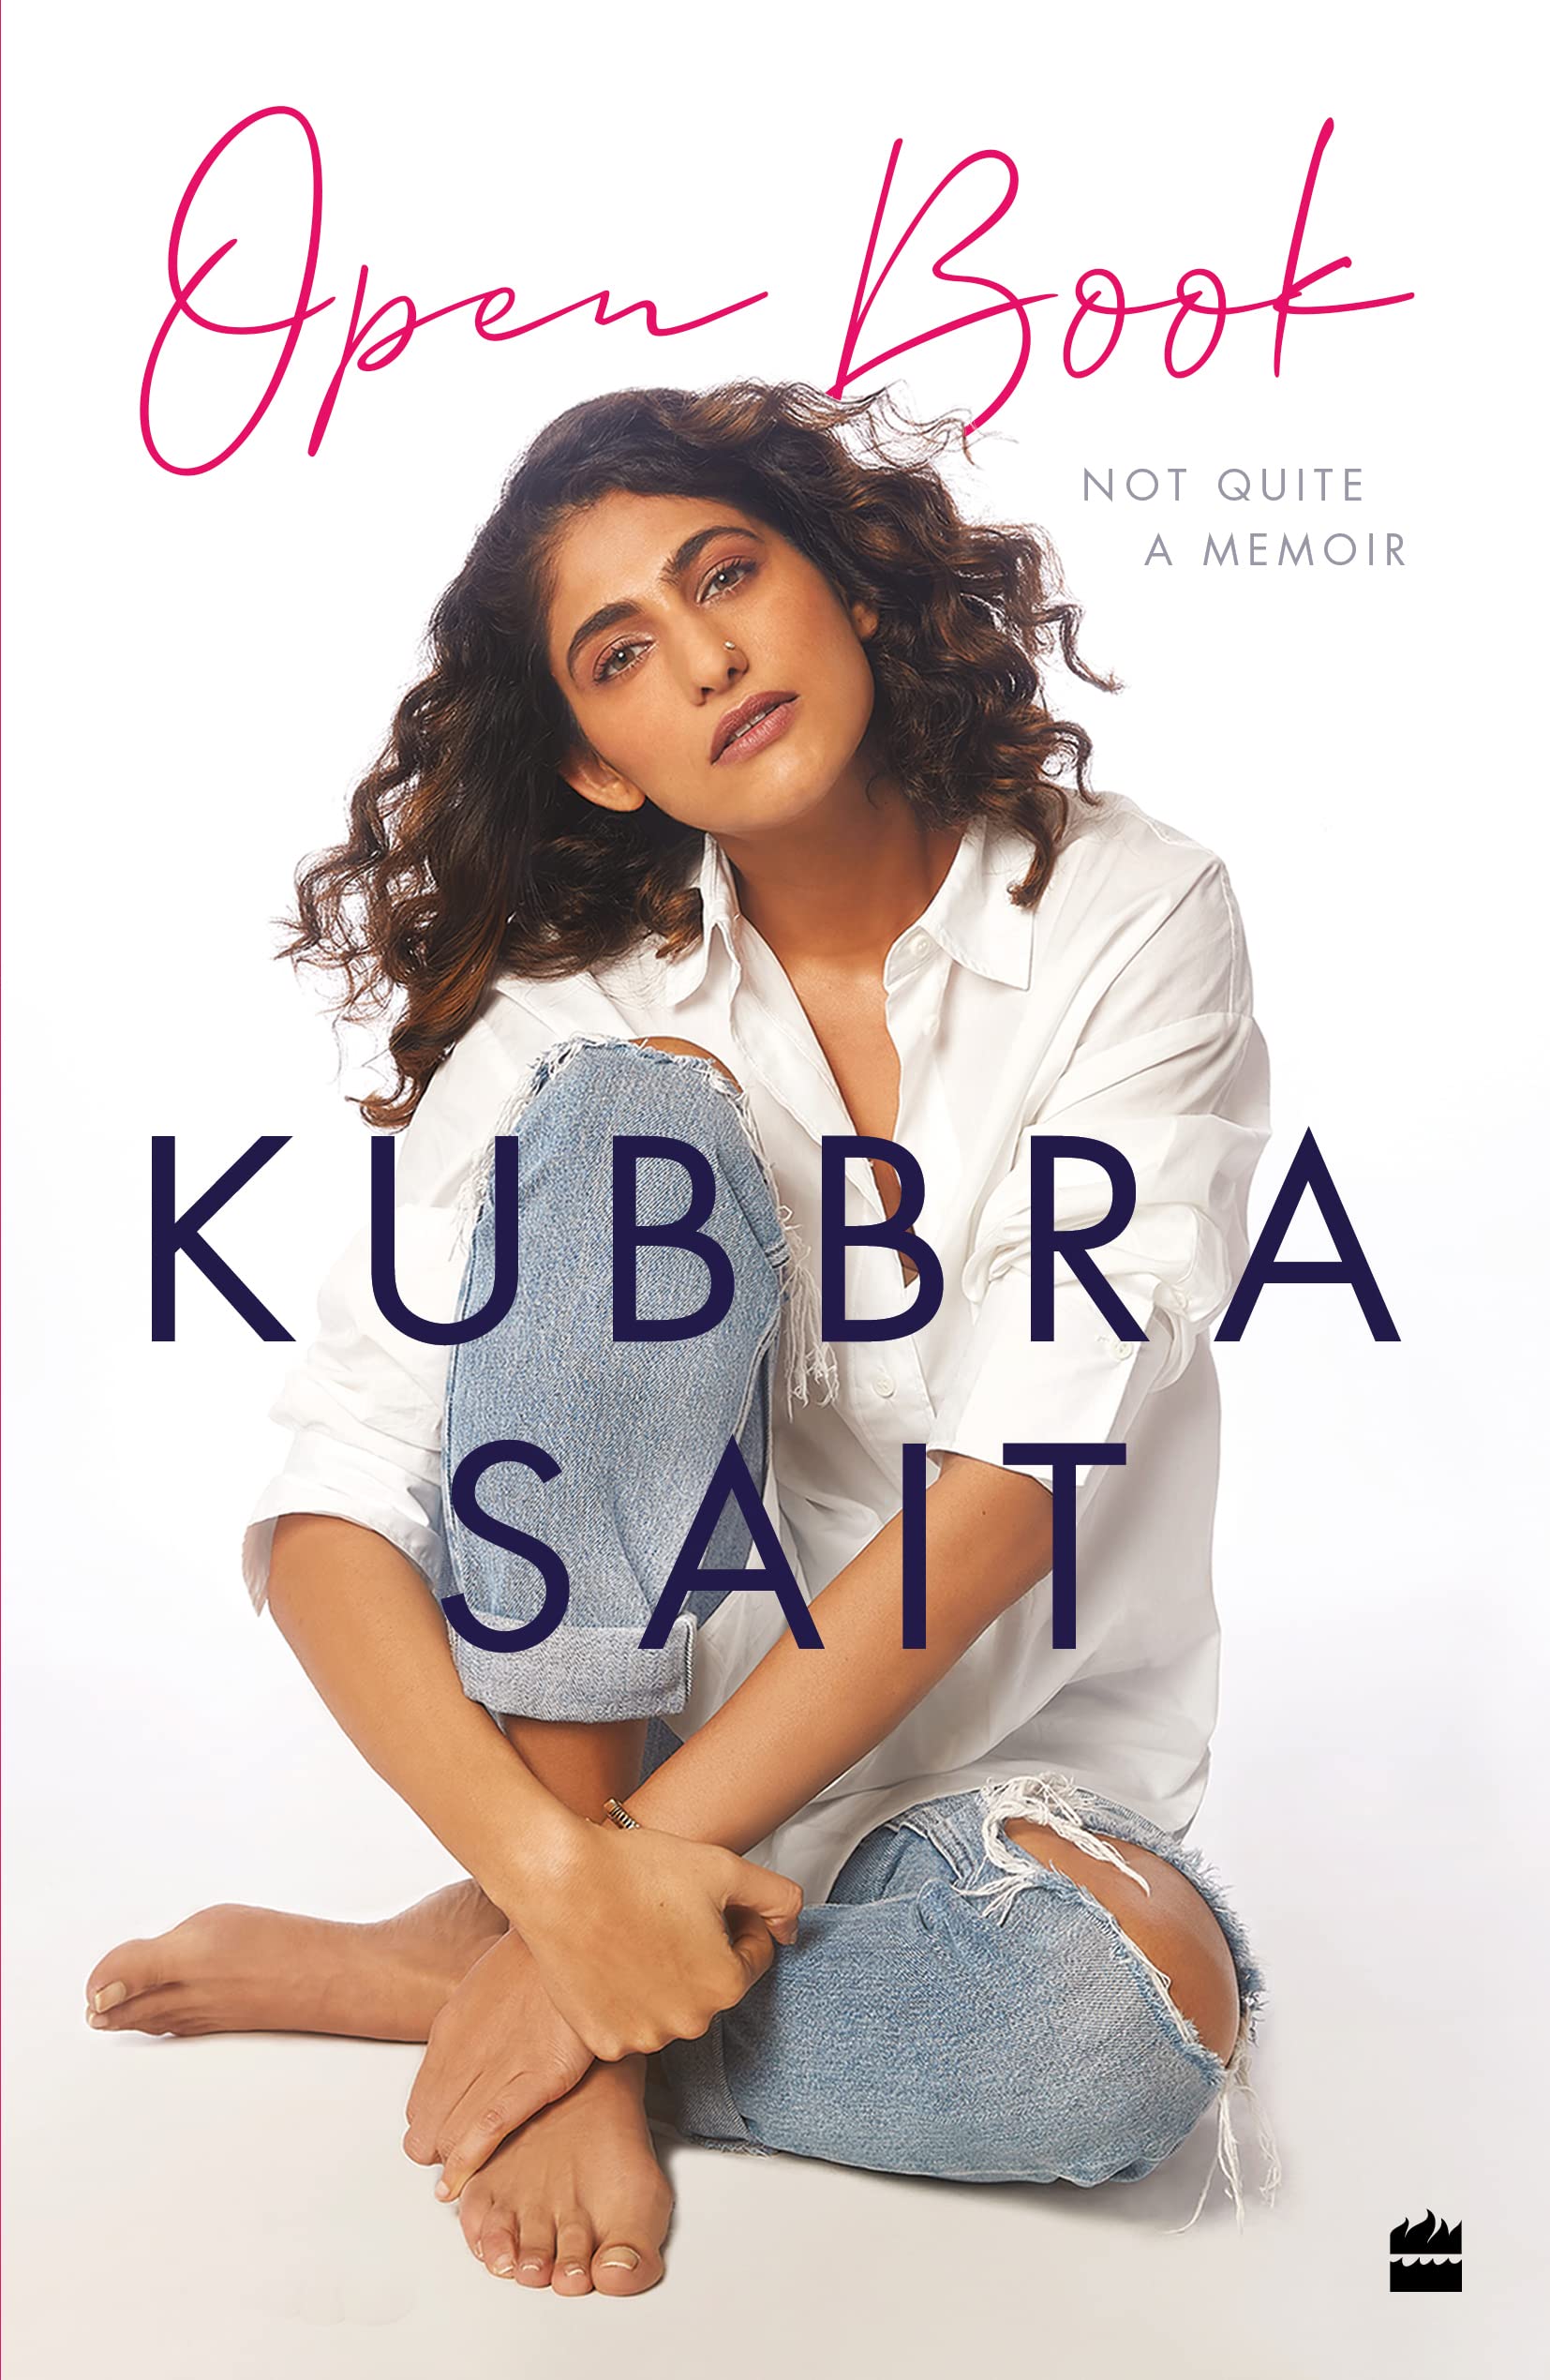 Kubbra Sait reveals getting an abortion after one-night stand